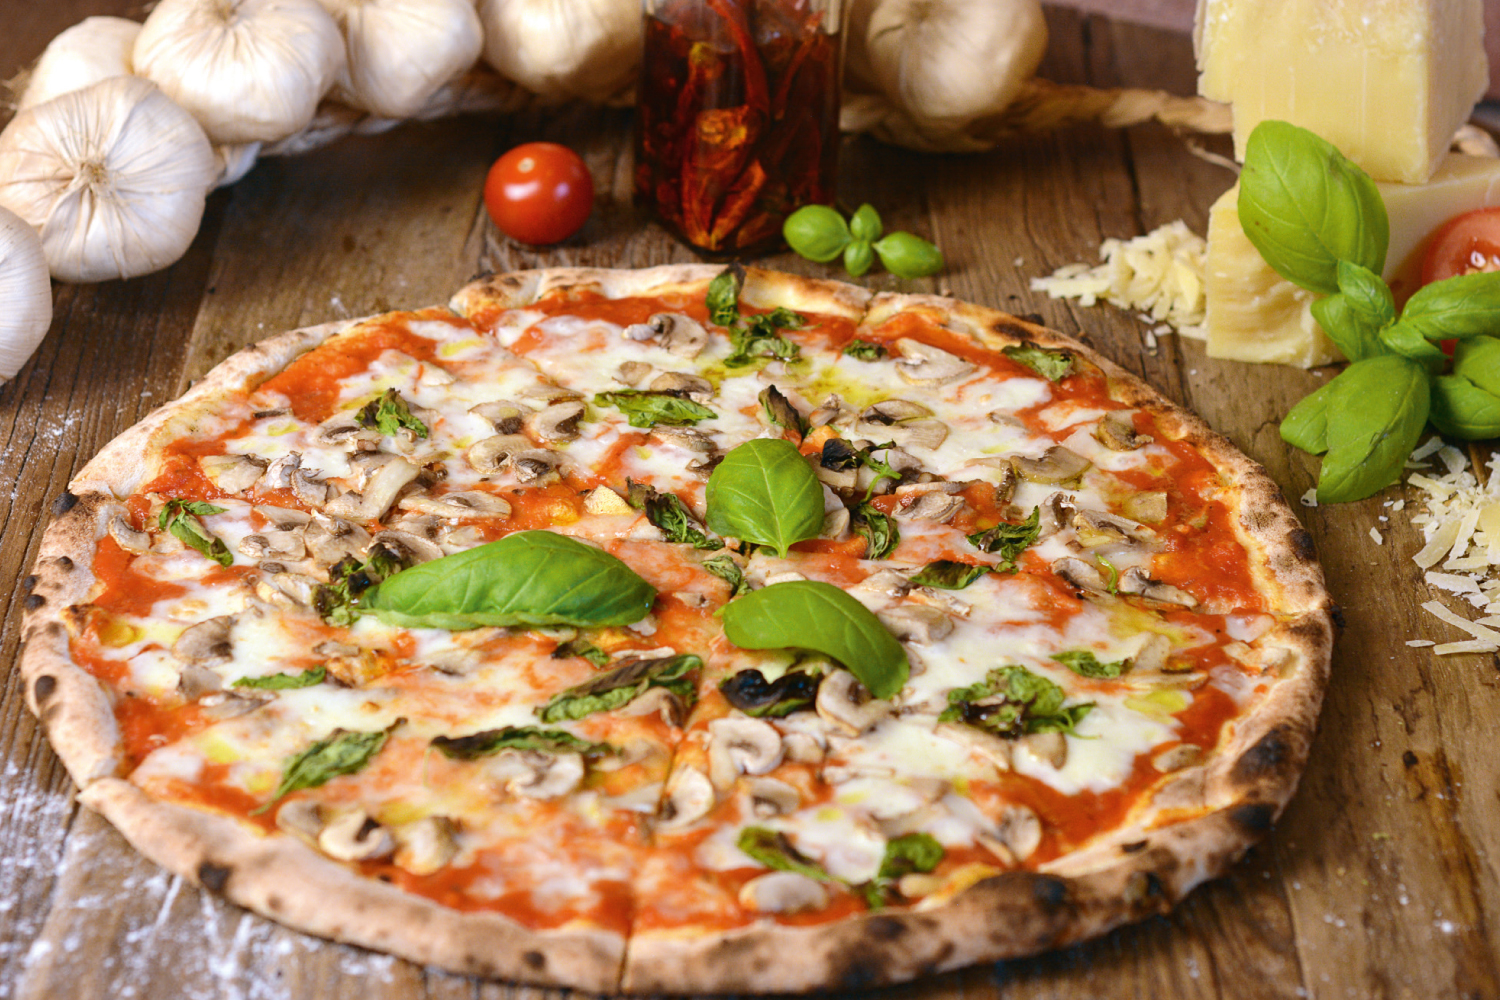 Pizza Di Rocco Restaurants Time Out Abu Dhabi